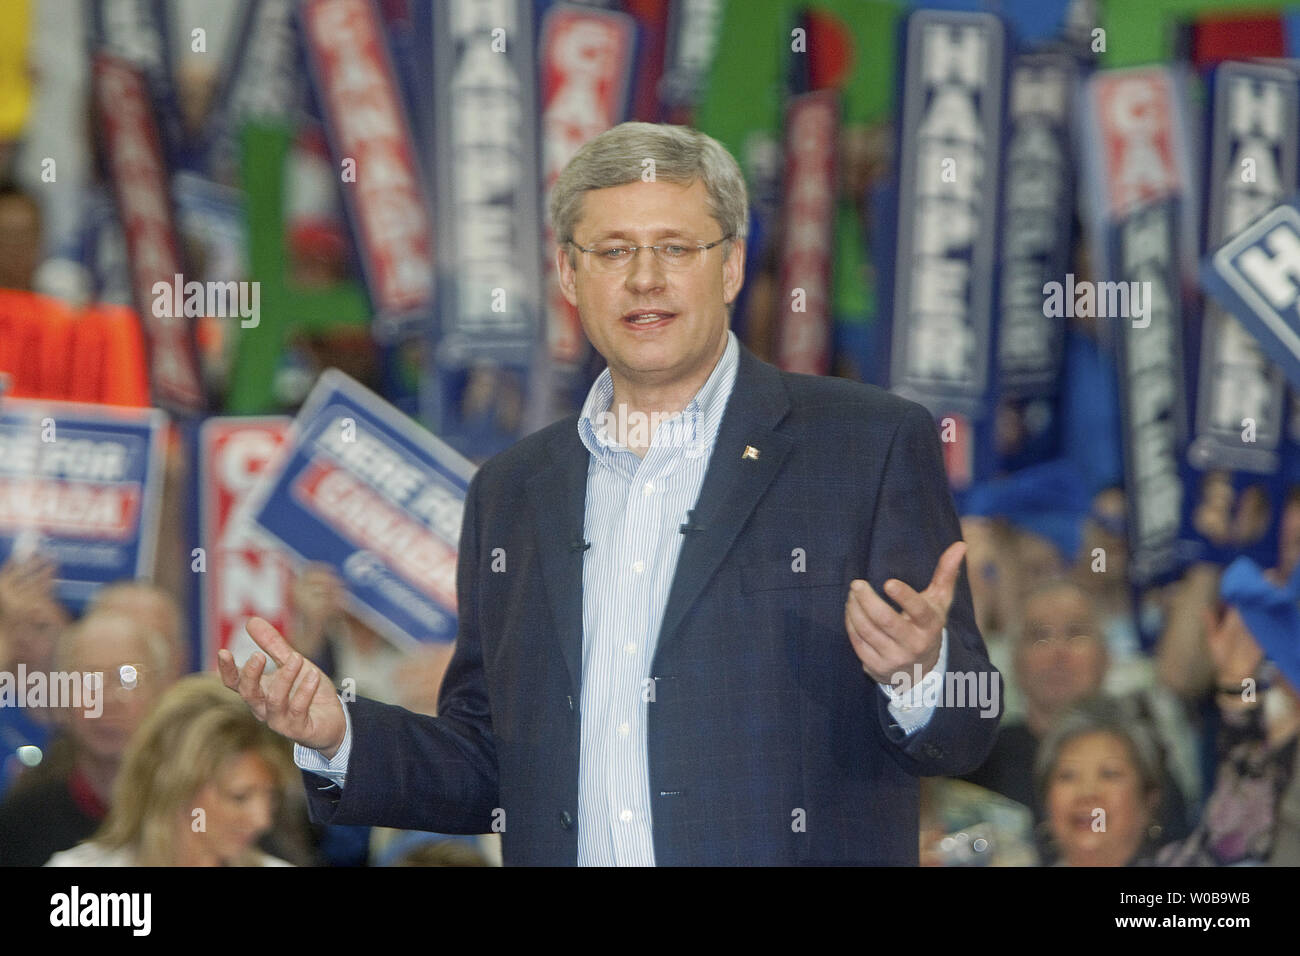 Conservative Party leader Stephen Harper ends his 2011 federal election campaign, speaking to supporters at the Rally in the Valley in Abbotsford near Vancouver, British Columbia on the evening of May 1, 2011. Voters go to the polls tomorrow.  UPI/Heinz Ruckemann Stock Photo